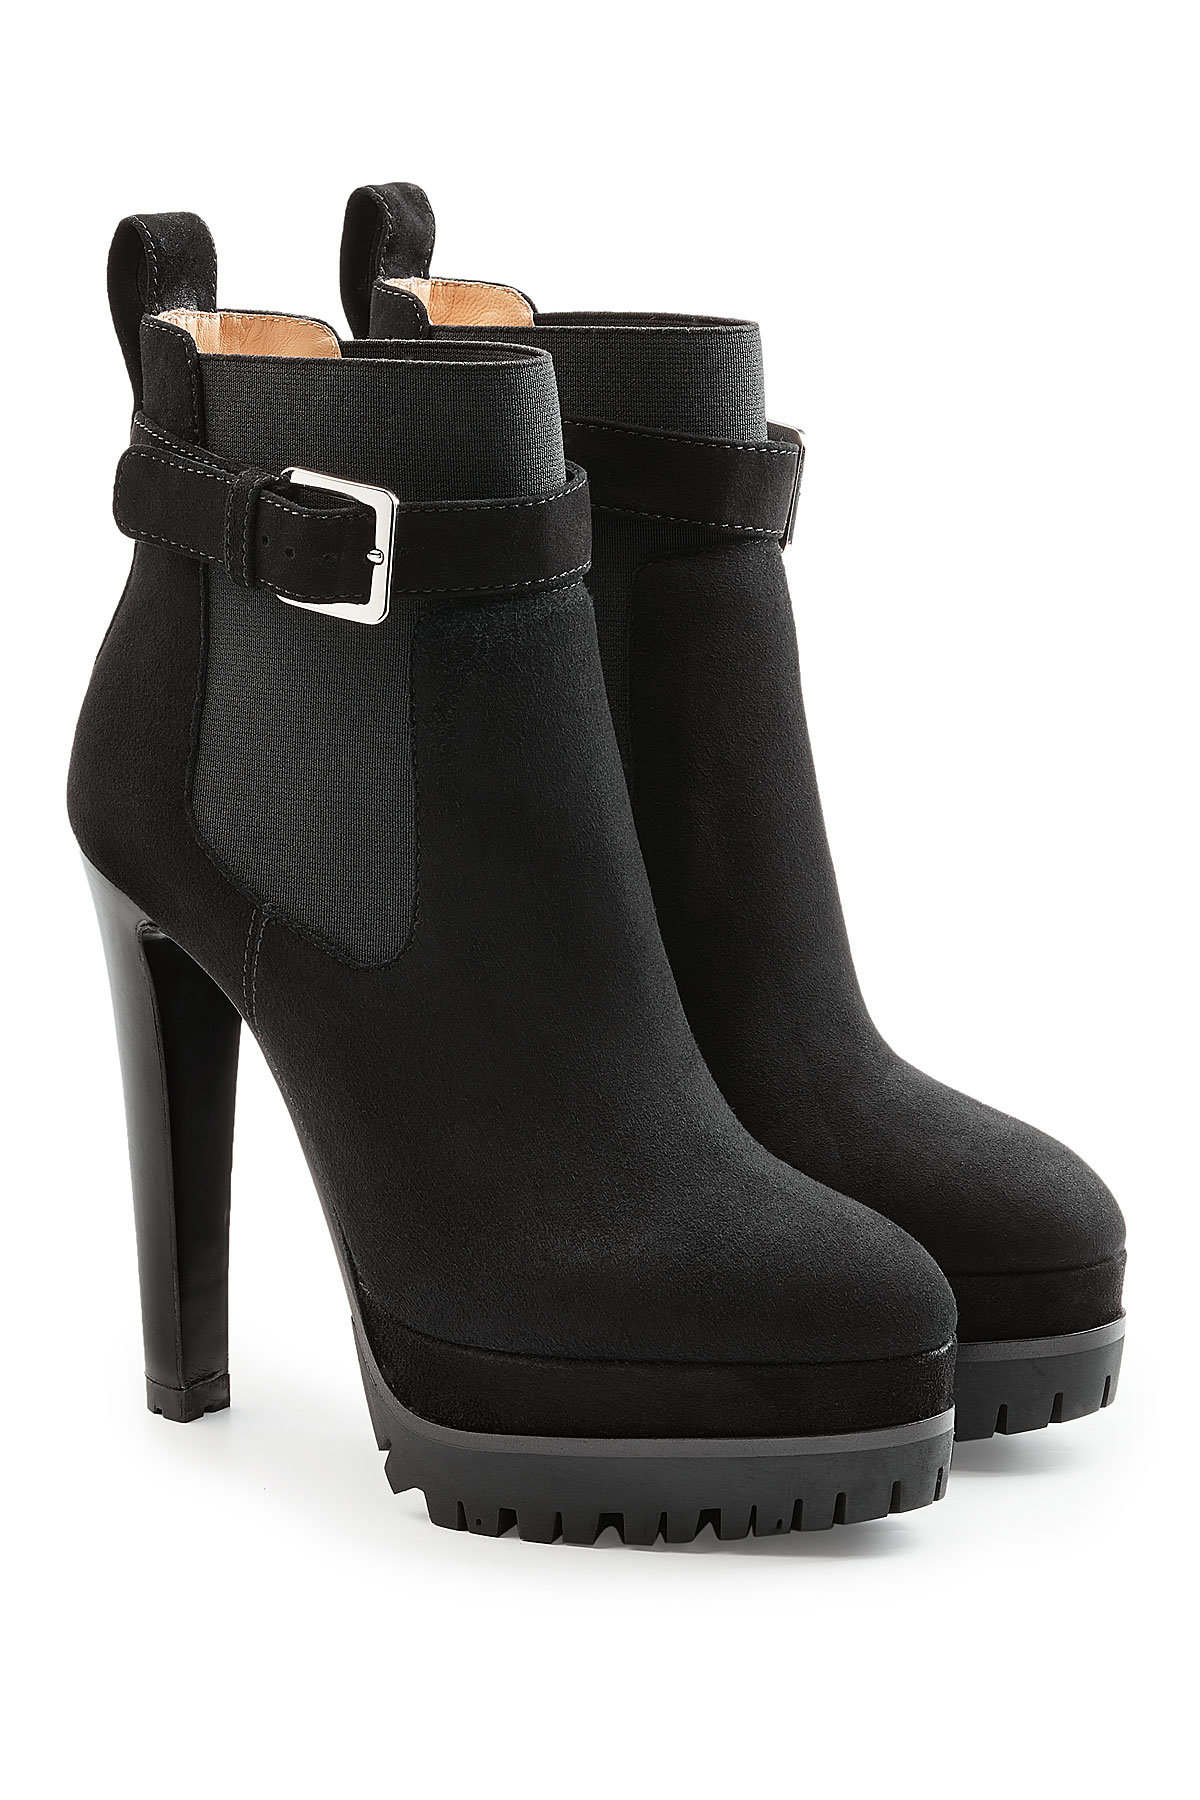 Sergio Rossi - Suede Ankle Boots with Leather